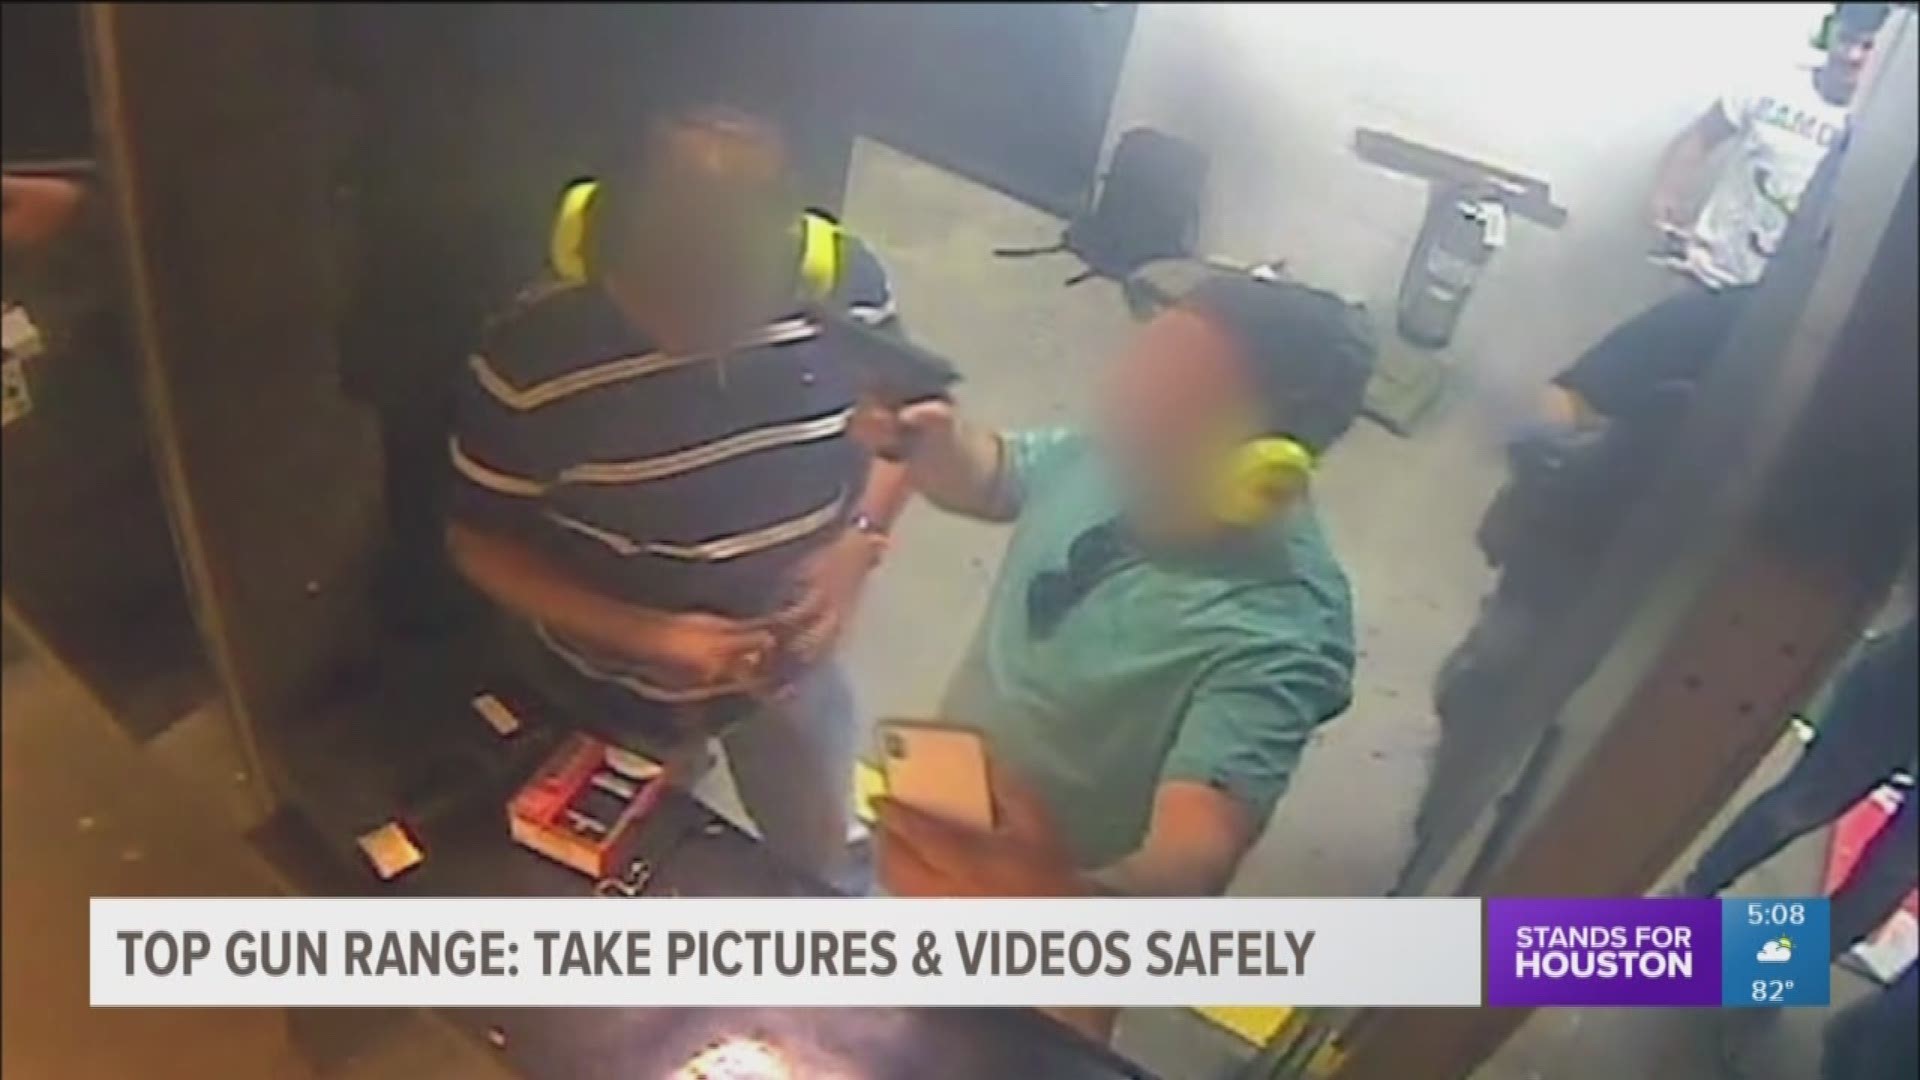 A viral surveillance video from a gun range of a man pointing a gun to his friend's head while taking a selfie is raising warnings about safety.